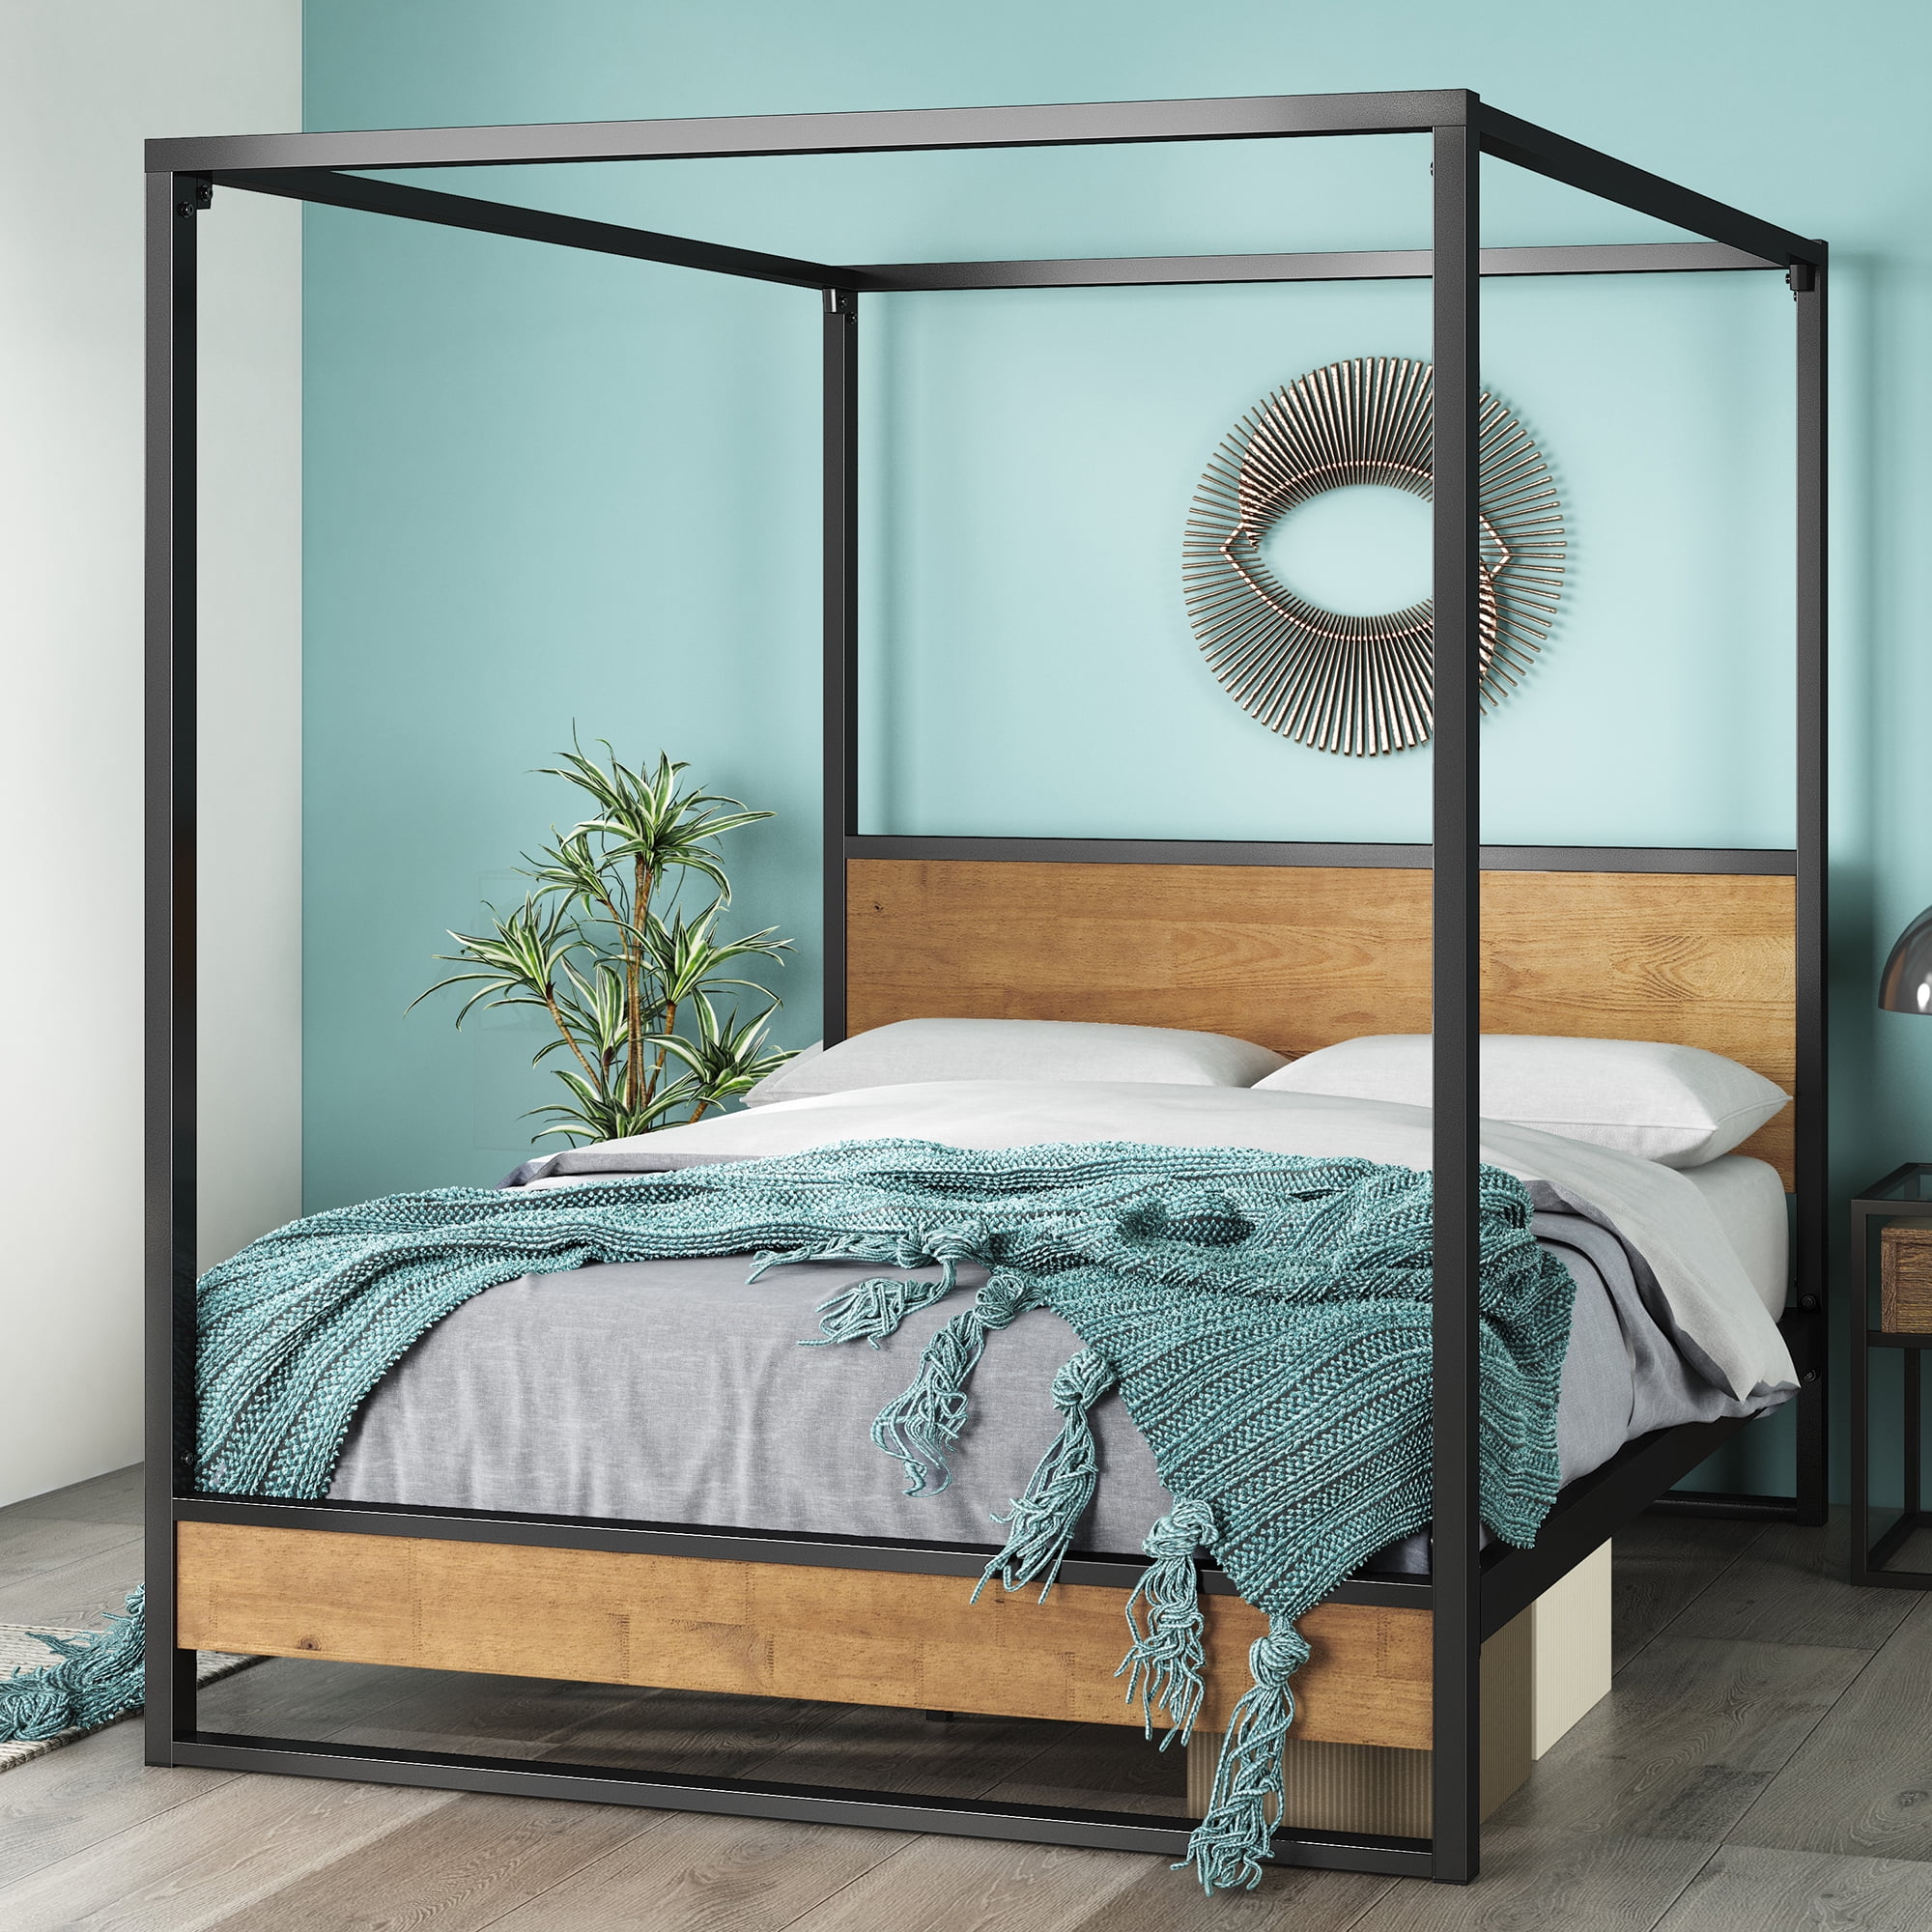 Zinus Suzanne 72 Metal And Wood Canopy, Stanley Canopy Bed King